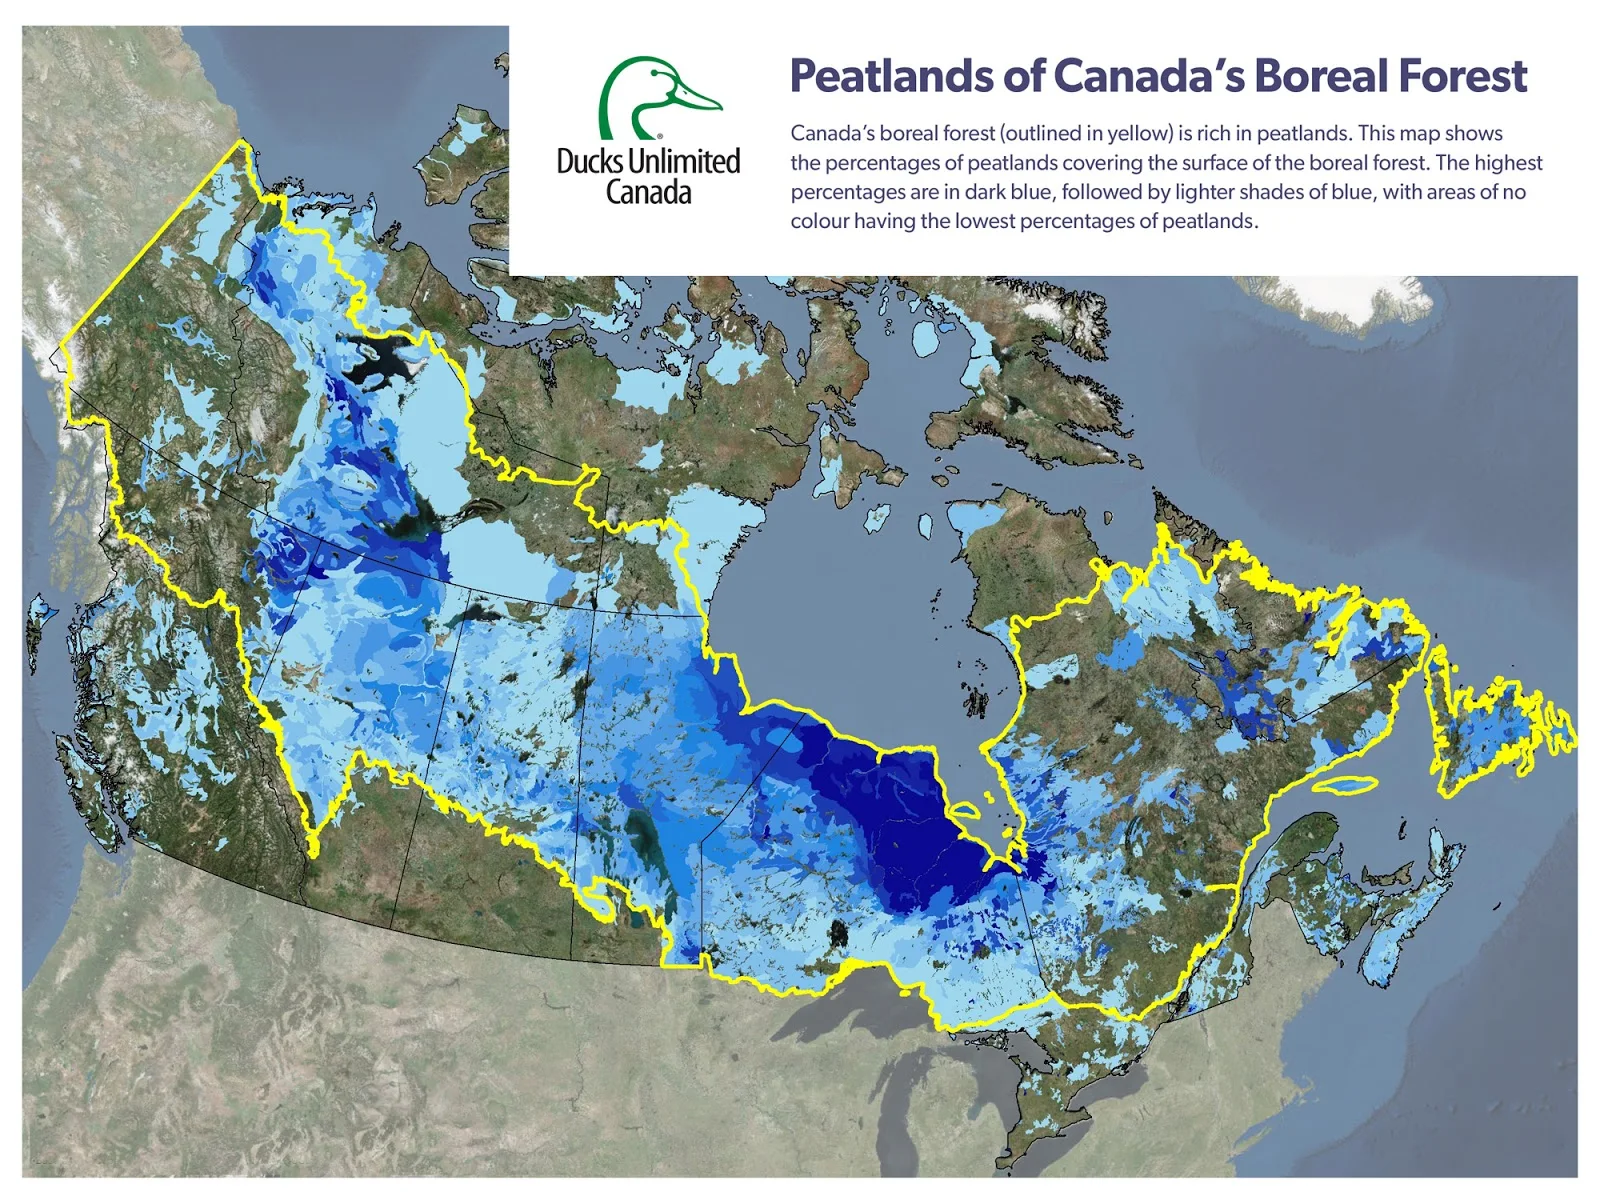 Carbon Storing Peatlands in Canada's Boreal Forest 